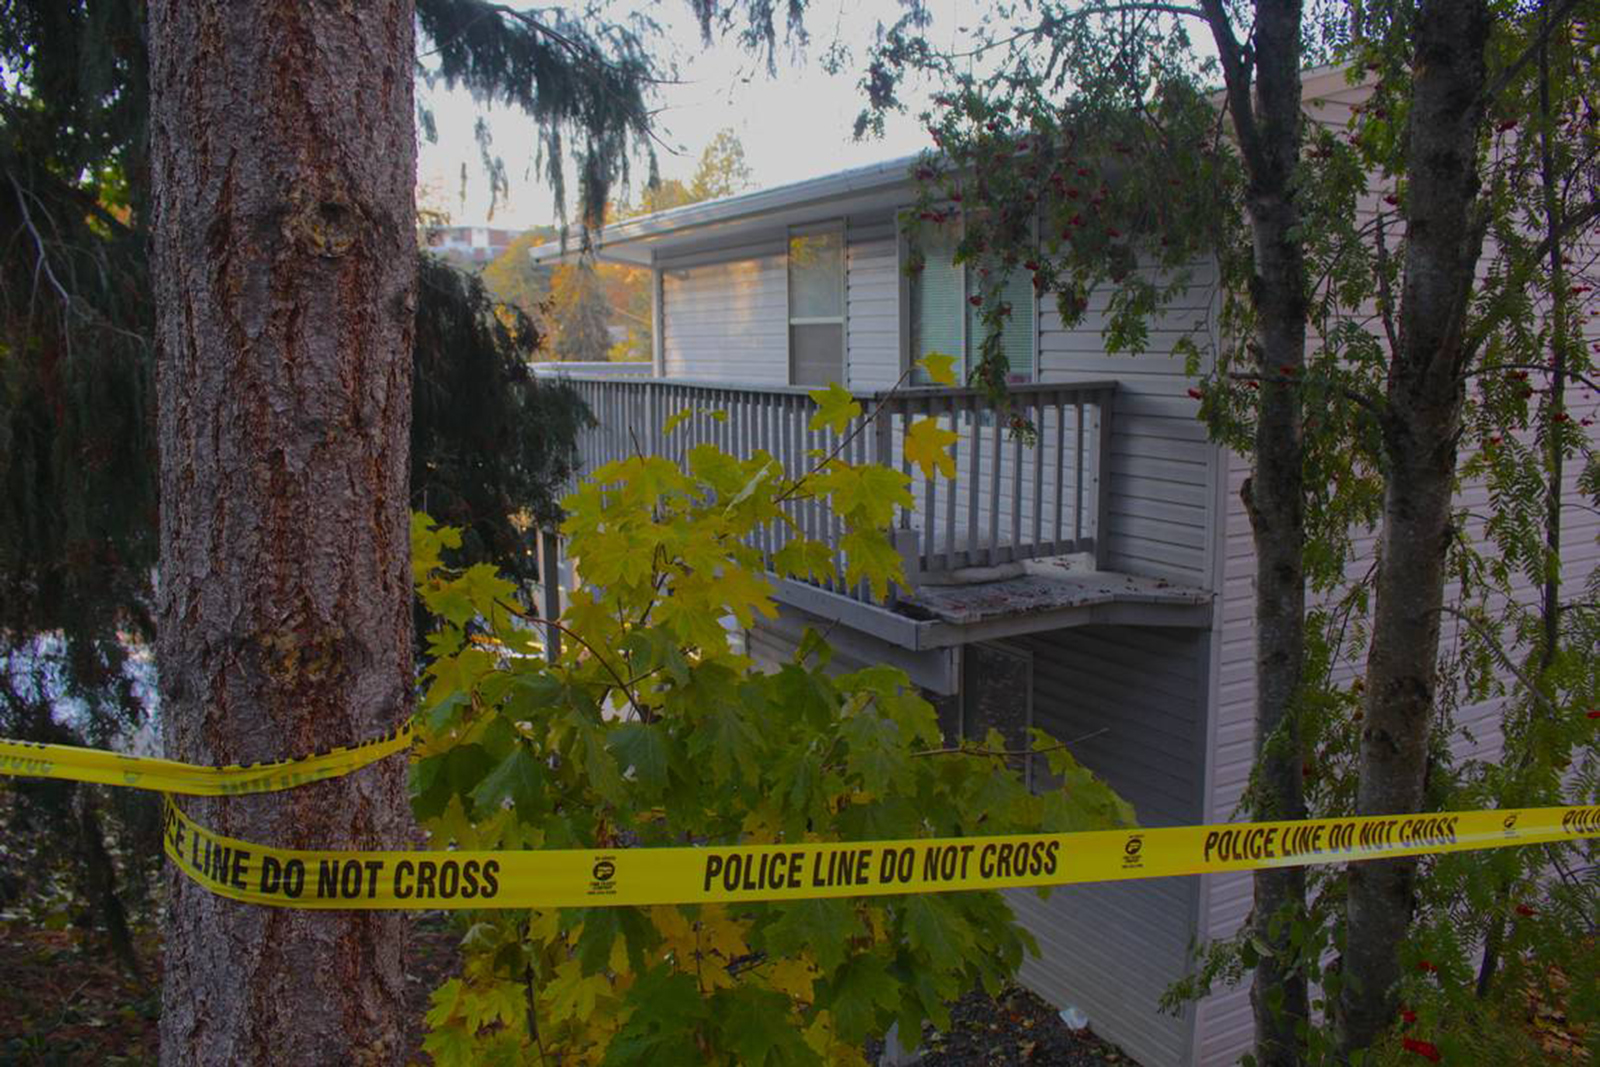 Four University of Idaho students were found dead Nov. 13 at this three-story home on King Road in ...